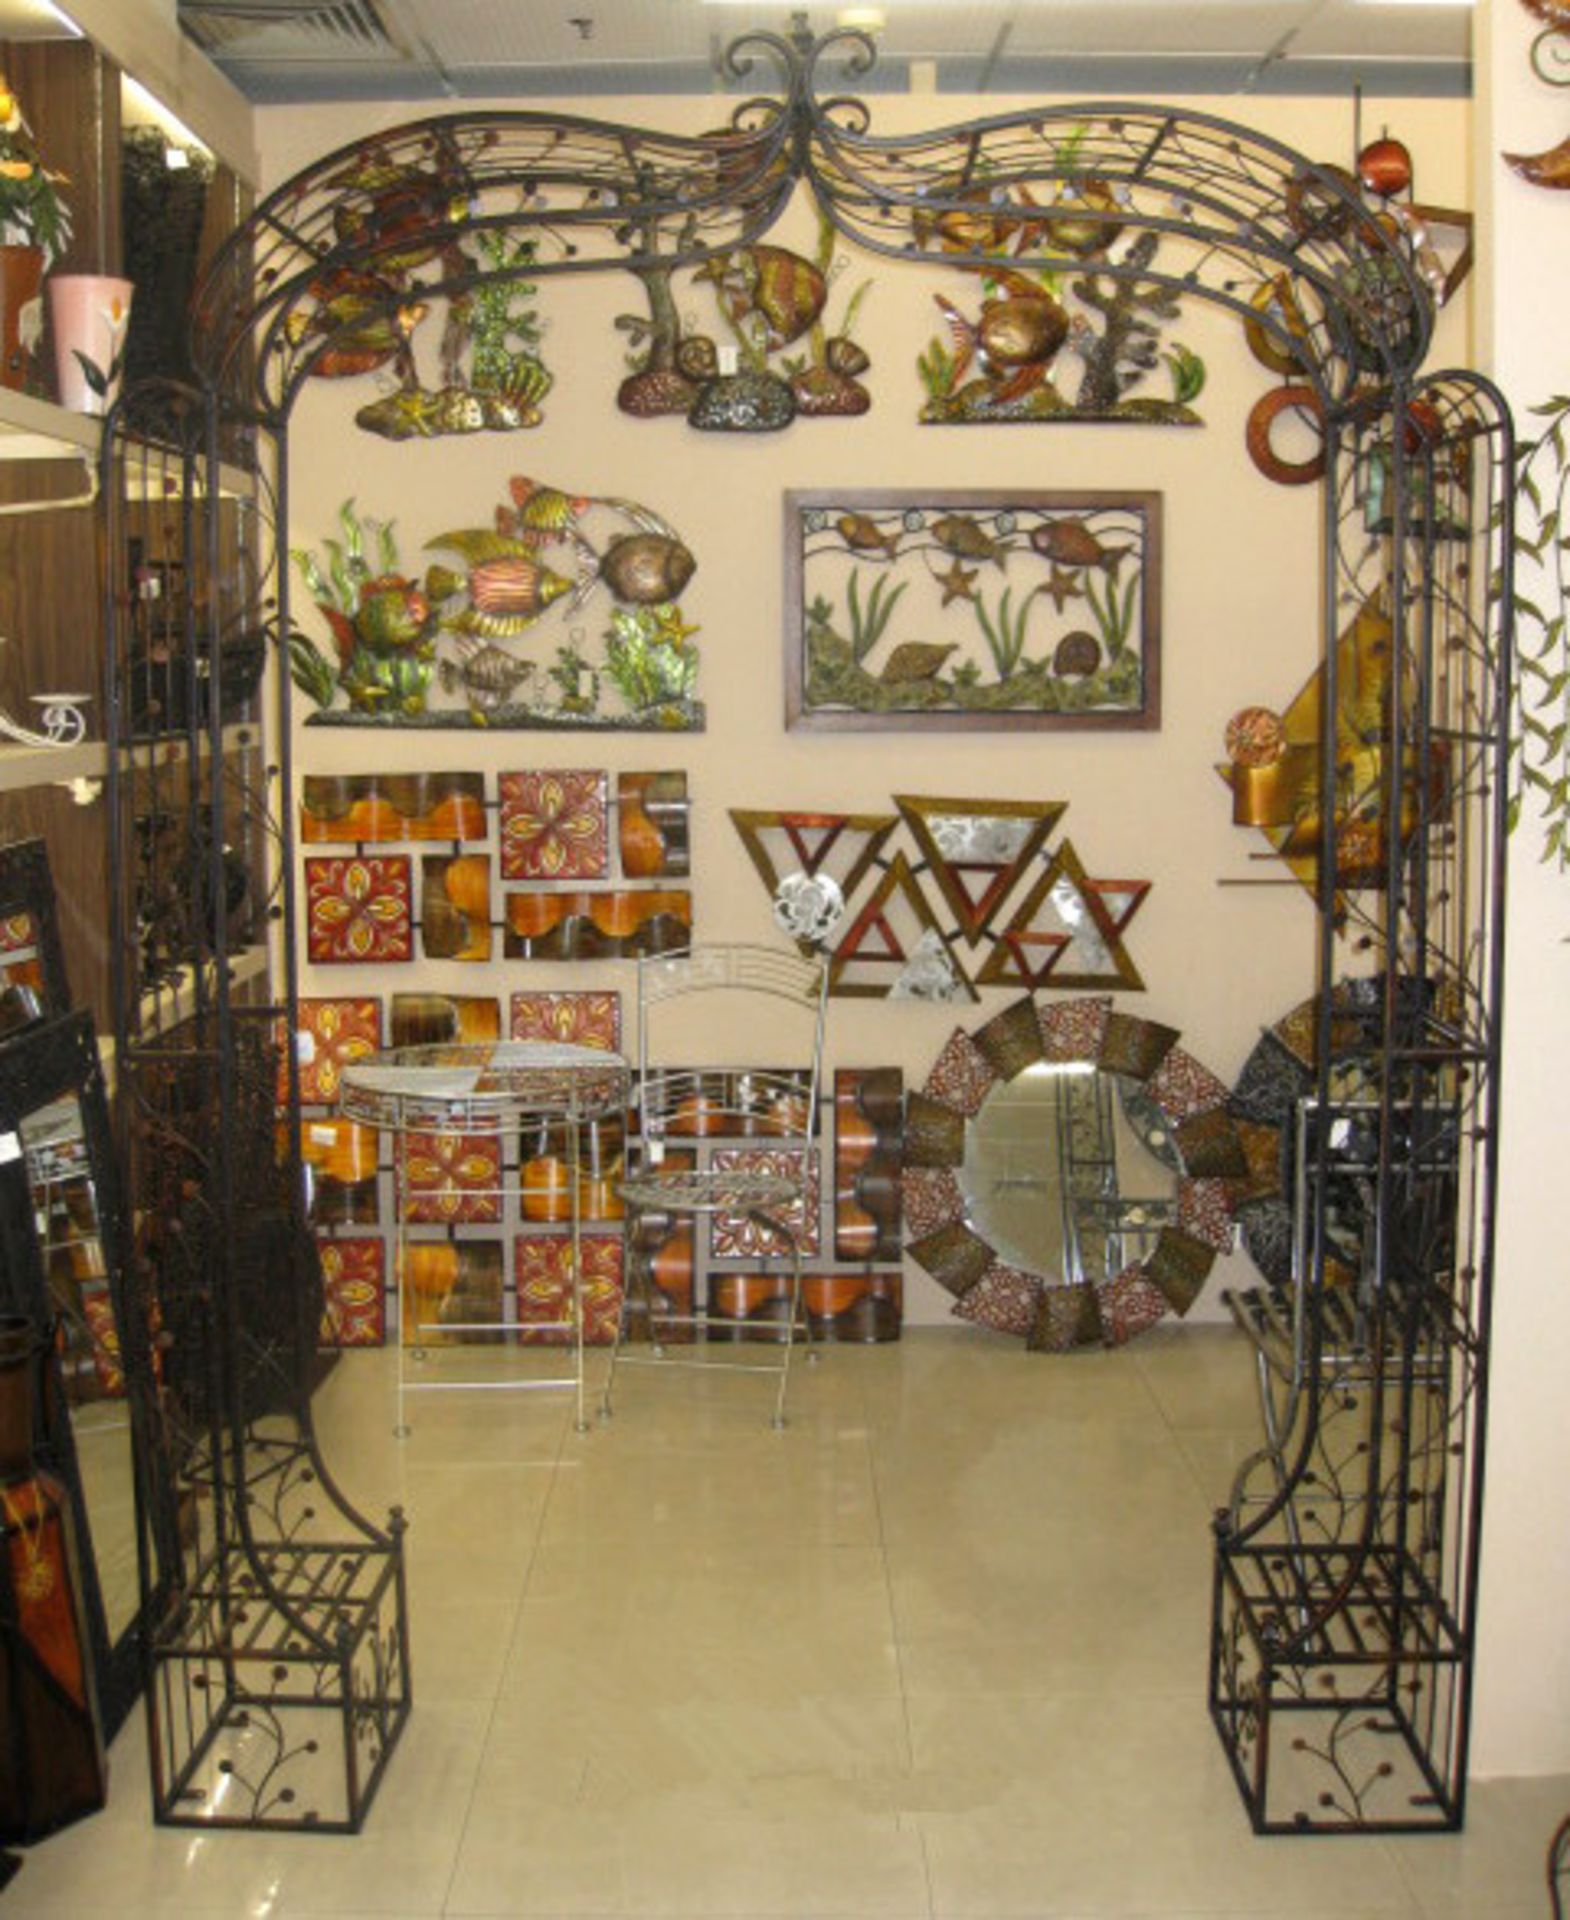 NEW BOXED ORNATE IRON GARDEN ARCH